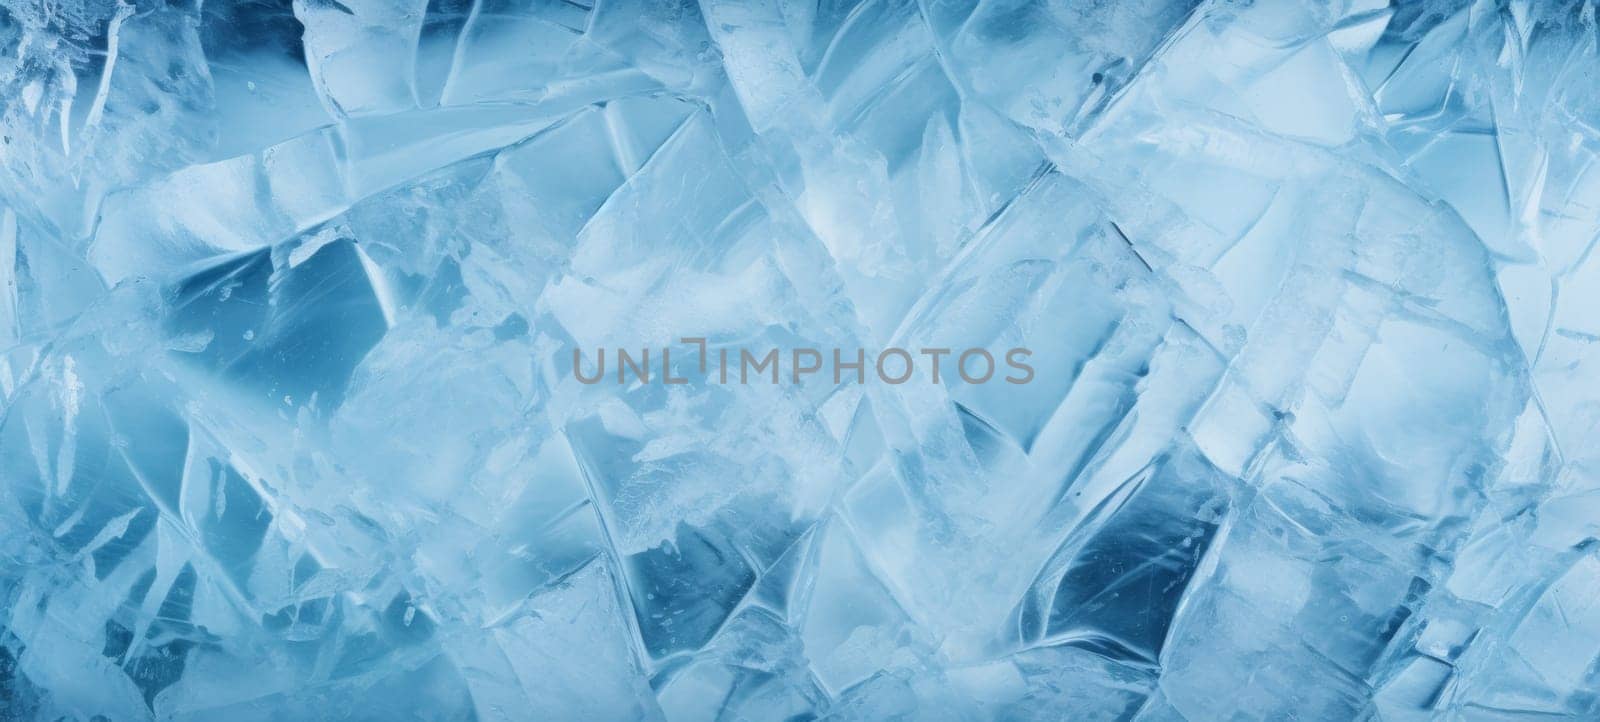 This abstract, detailed shot captures the expressive texture of ice, with its translucent blue tones and flowing lines